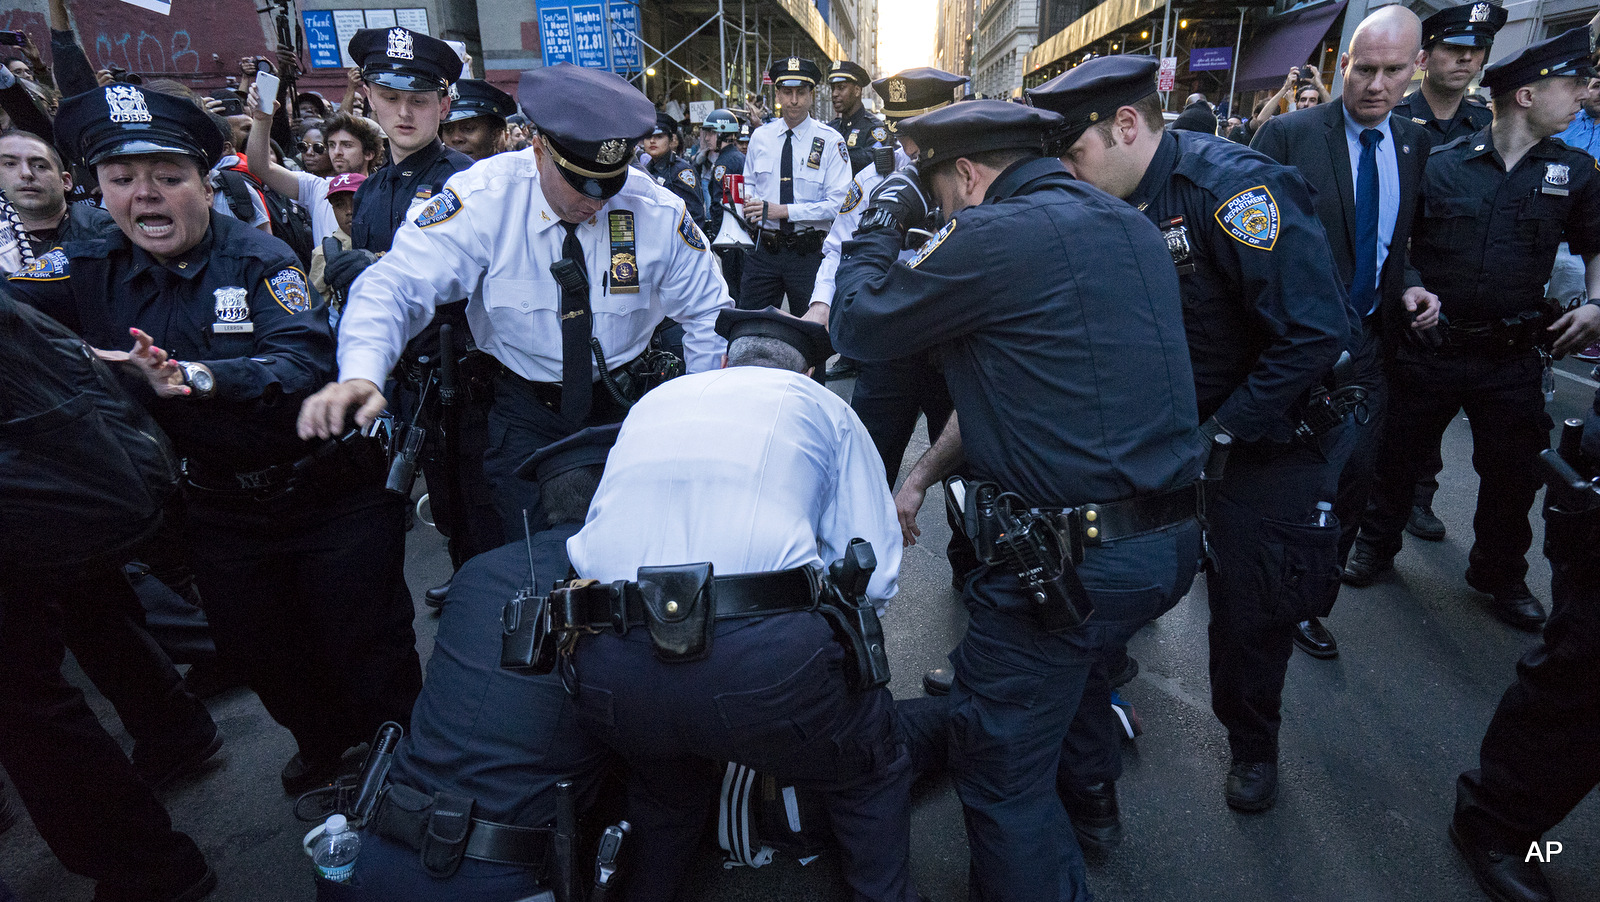 Protesters engage with police officers near Union Square, Wednesday, April 29, 2015, in New York. People gathered to protest the death of Freddie Gray, a Baltimore man who was critically injured in police custody. 